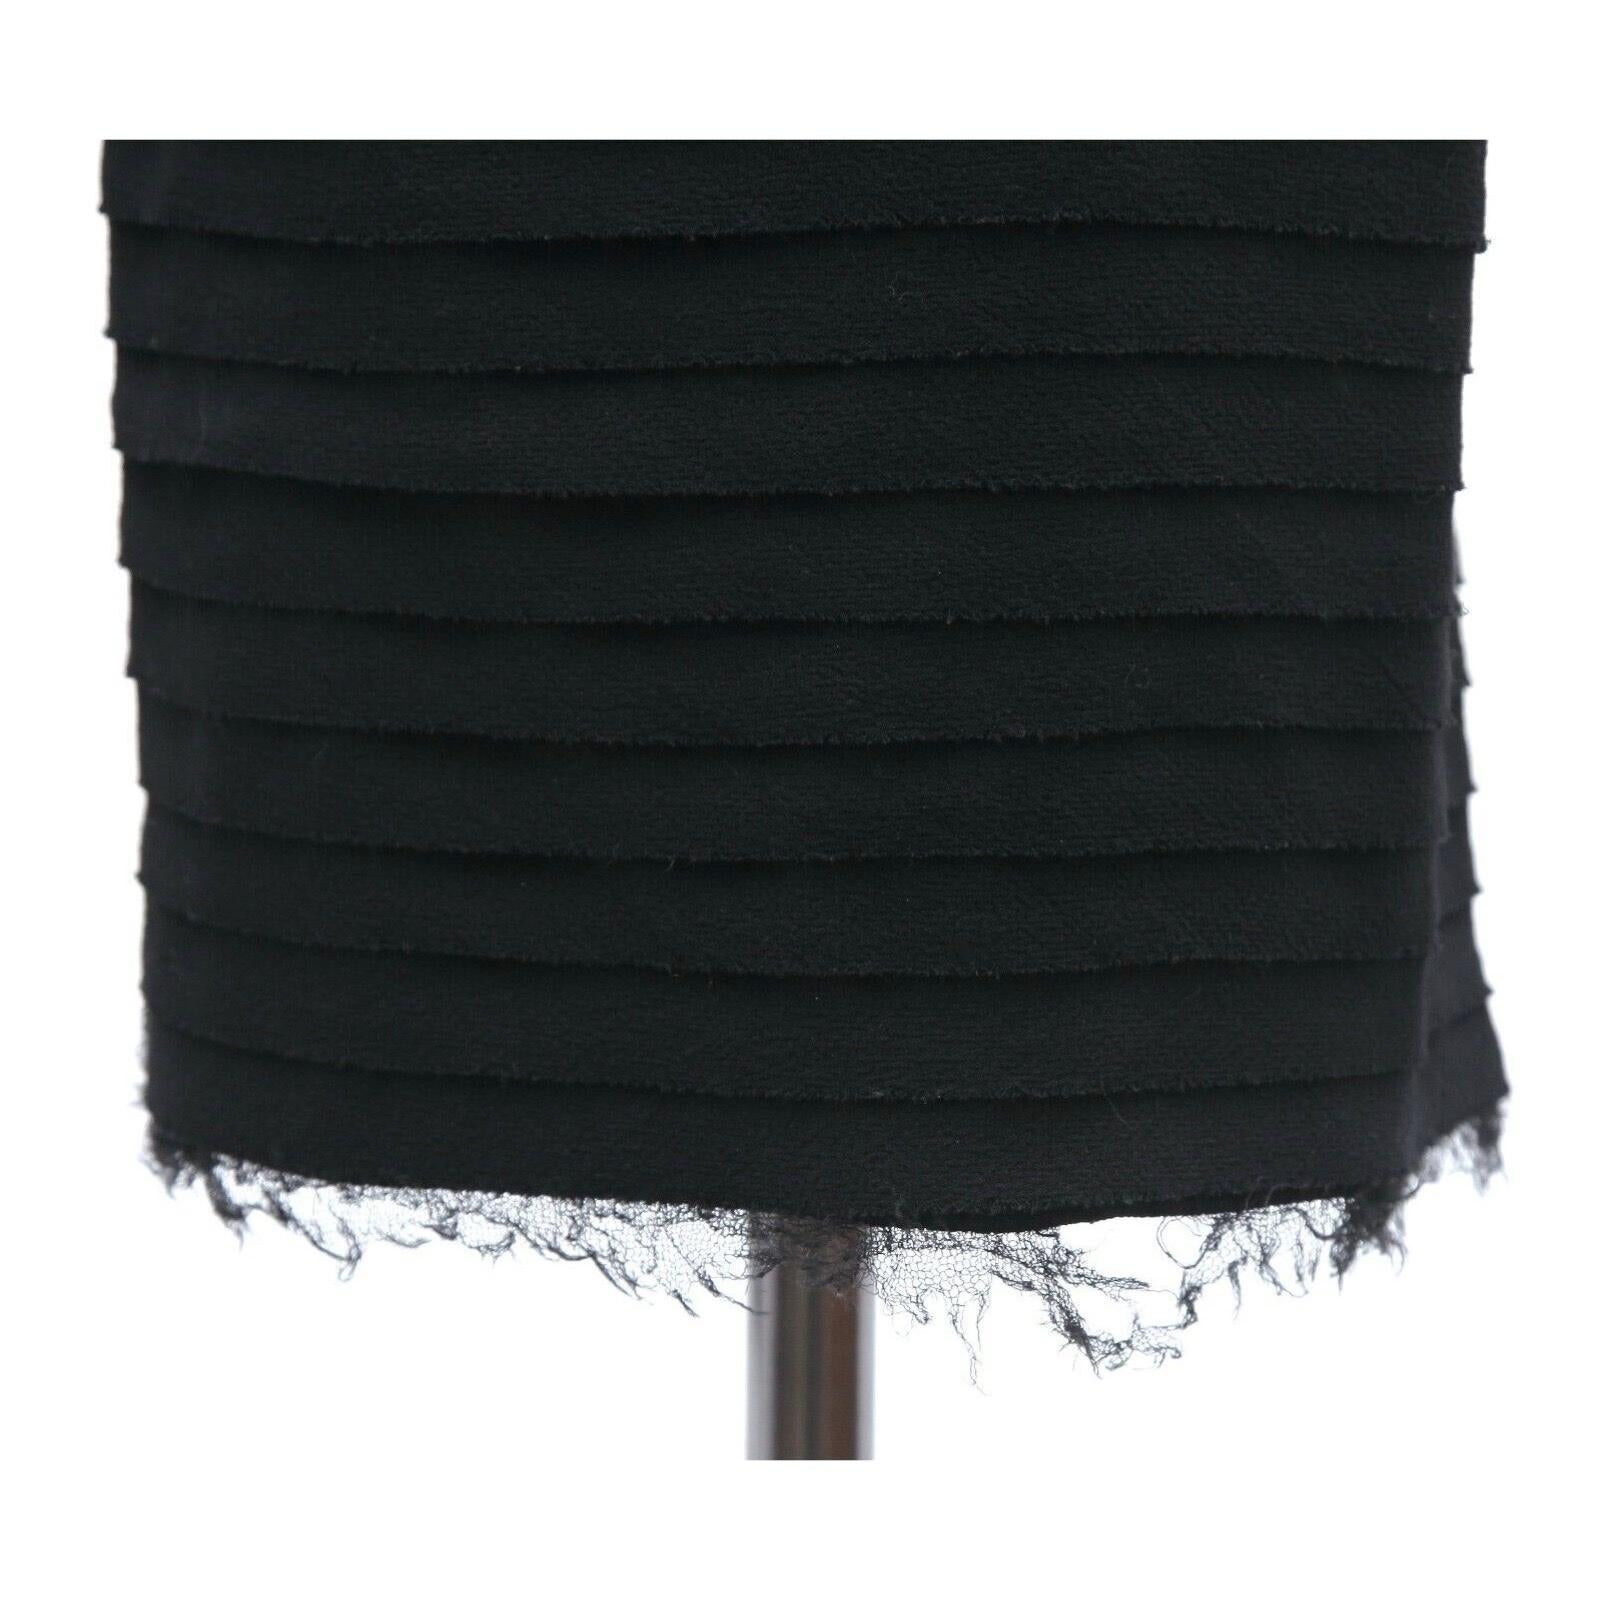 Women's CHANEL Dress Cap Sleeve Black Cocktail Evening Tiered Bow Sheath Wool Sz 38 For Sale